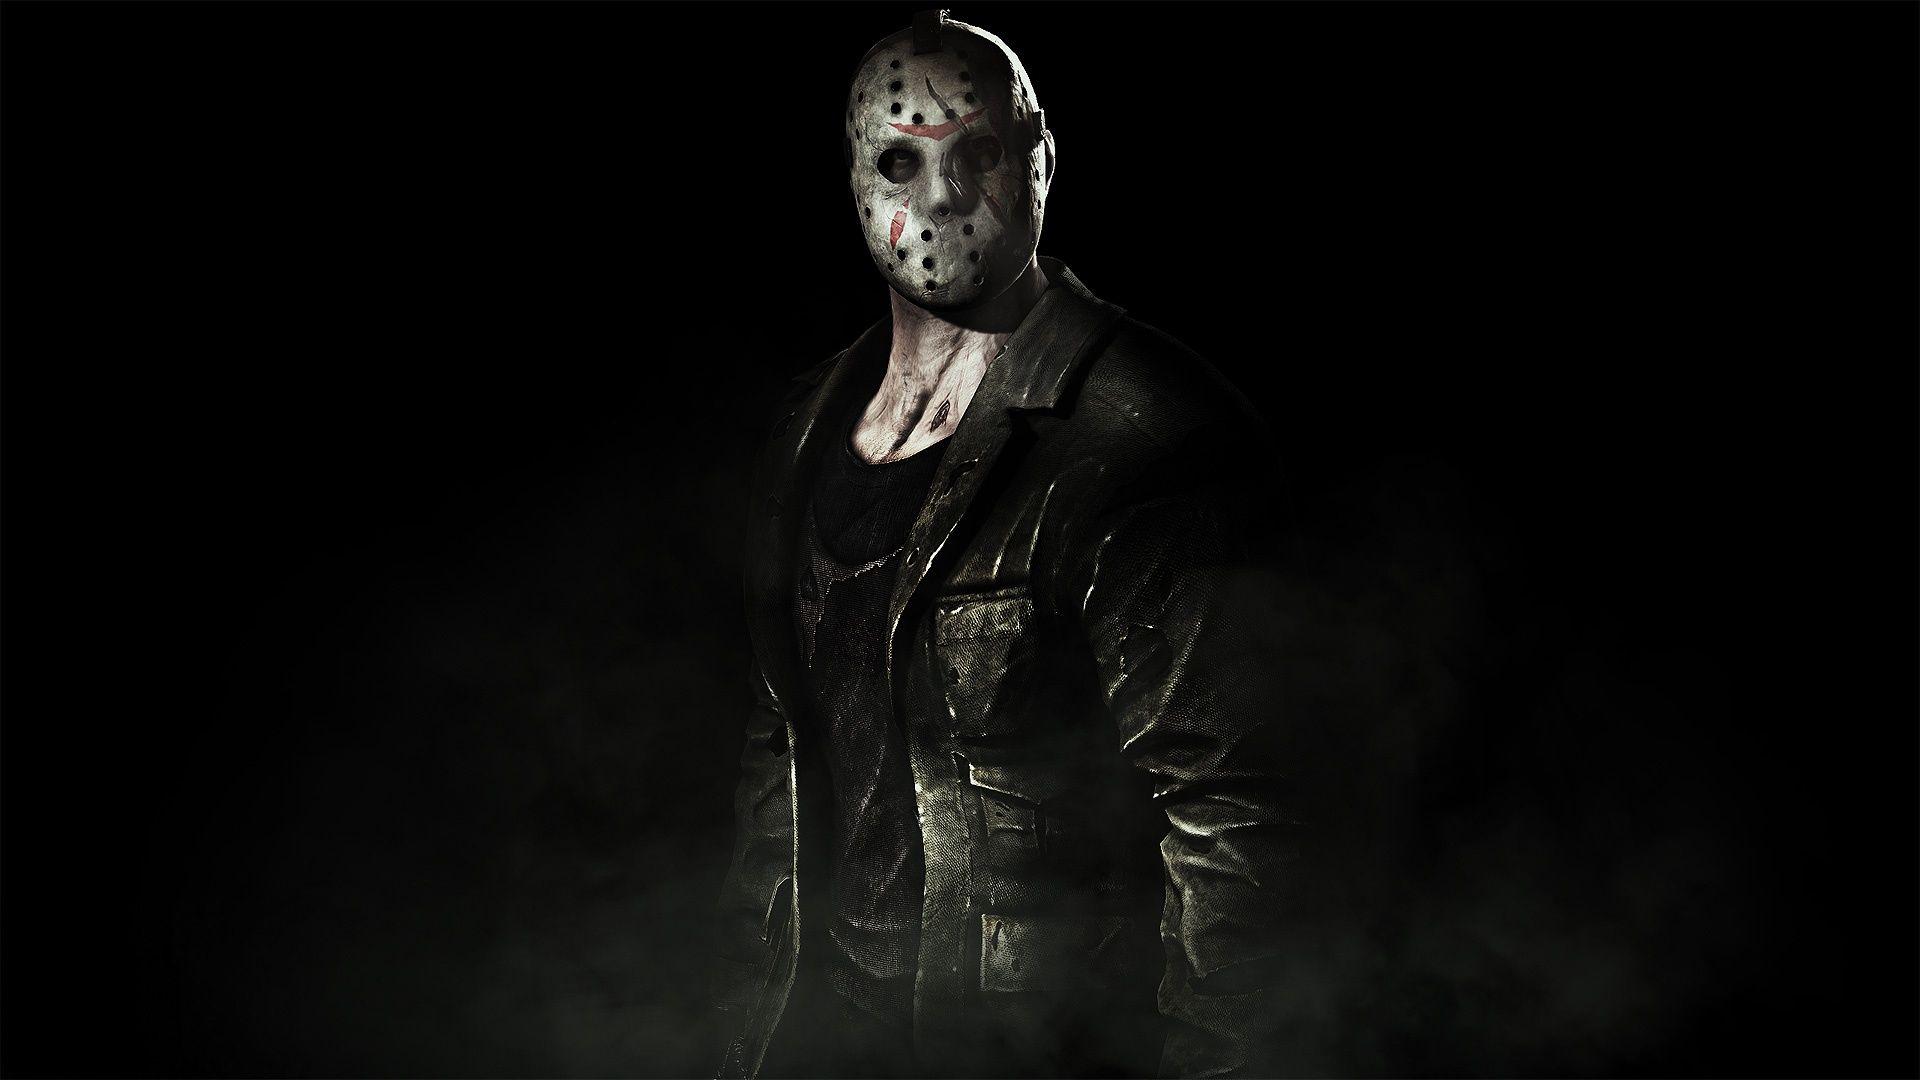 Jason HD Wallpaper And Background Image In The Jason Voorhees